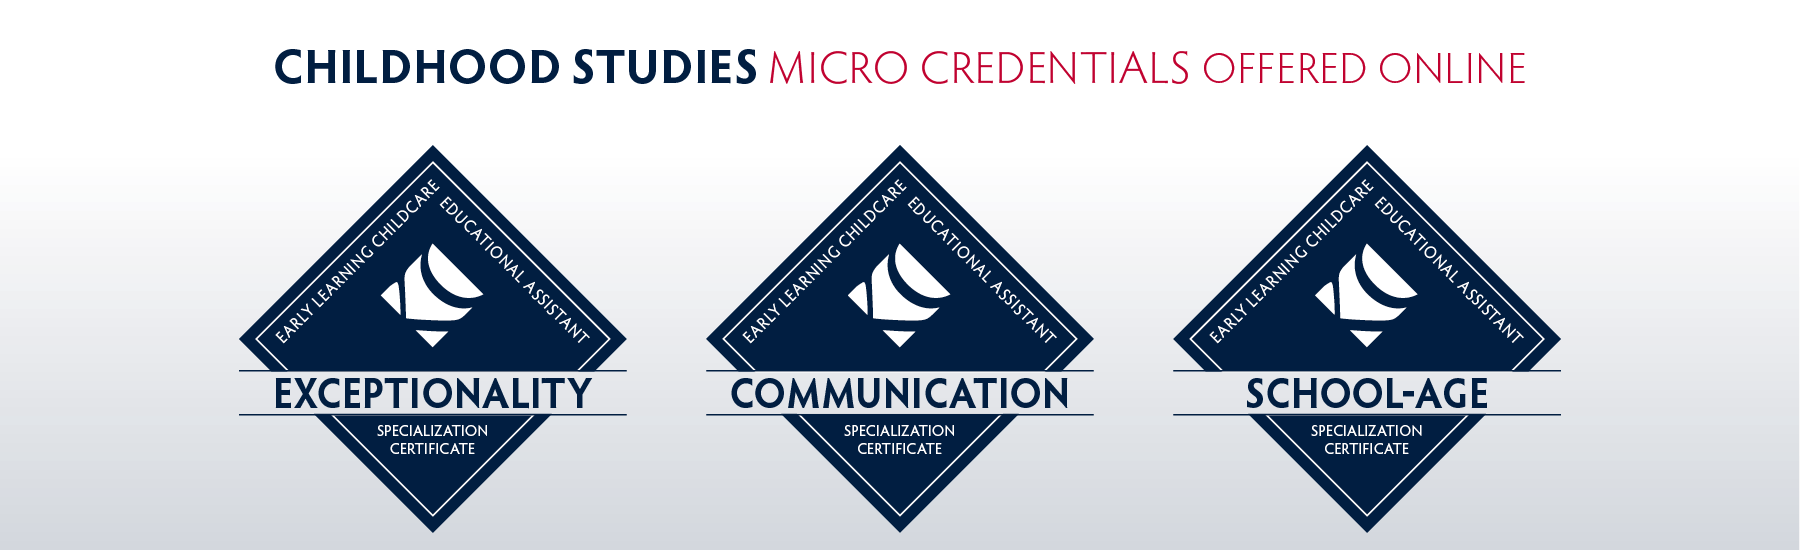 Childhood studies micro credentials offered online: Exceptionality, communication, and school age